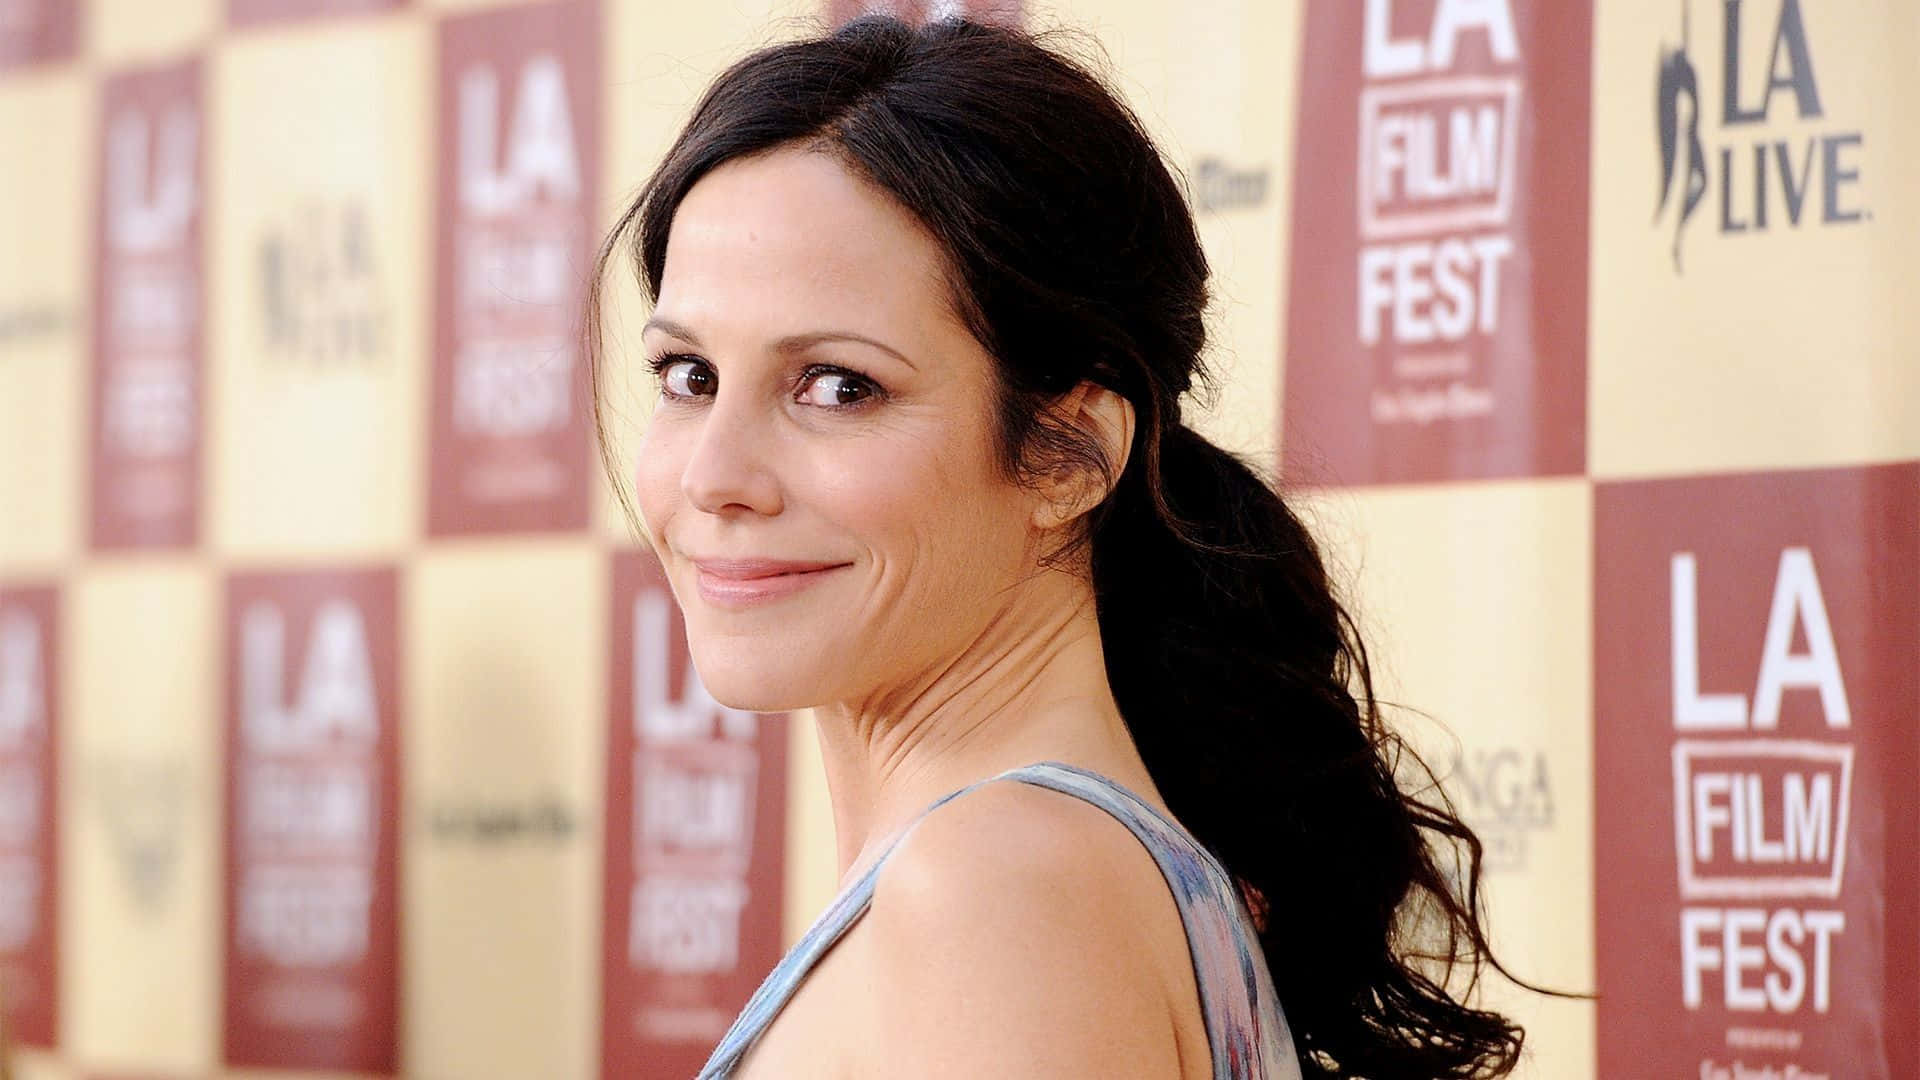 Mary-louise Parker Stunning Pose In A Black Dress Background